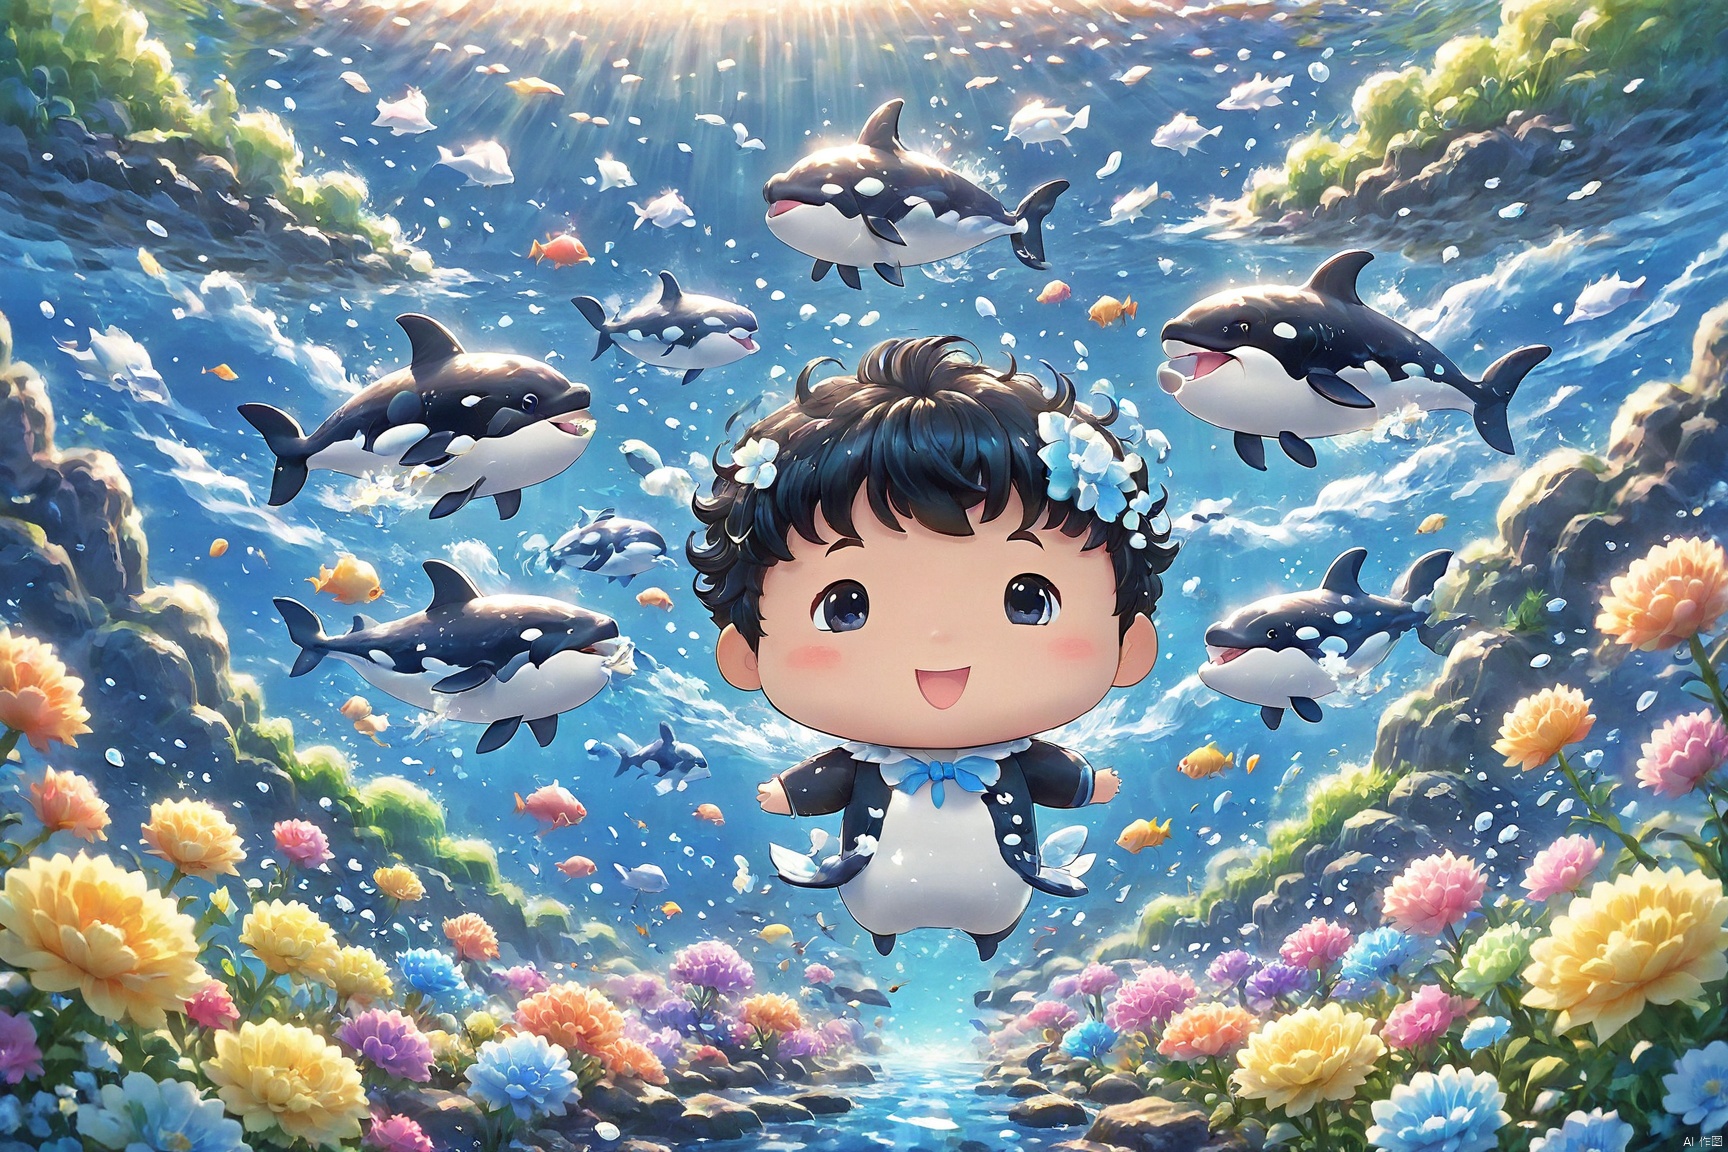 A boy with shining eyes, swimming through a colorful underwater world. Surrounded by various adorable sea creatures, a killer whale after him,A masterpiece with bright lights and cartoon-like visual effects., duobaansheying, MiRU